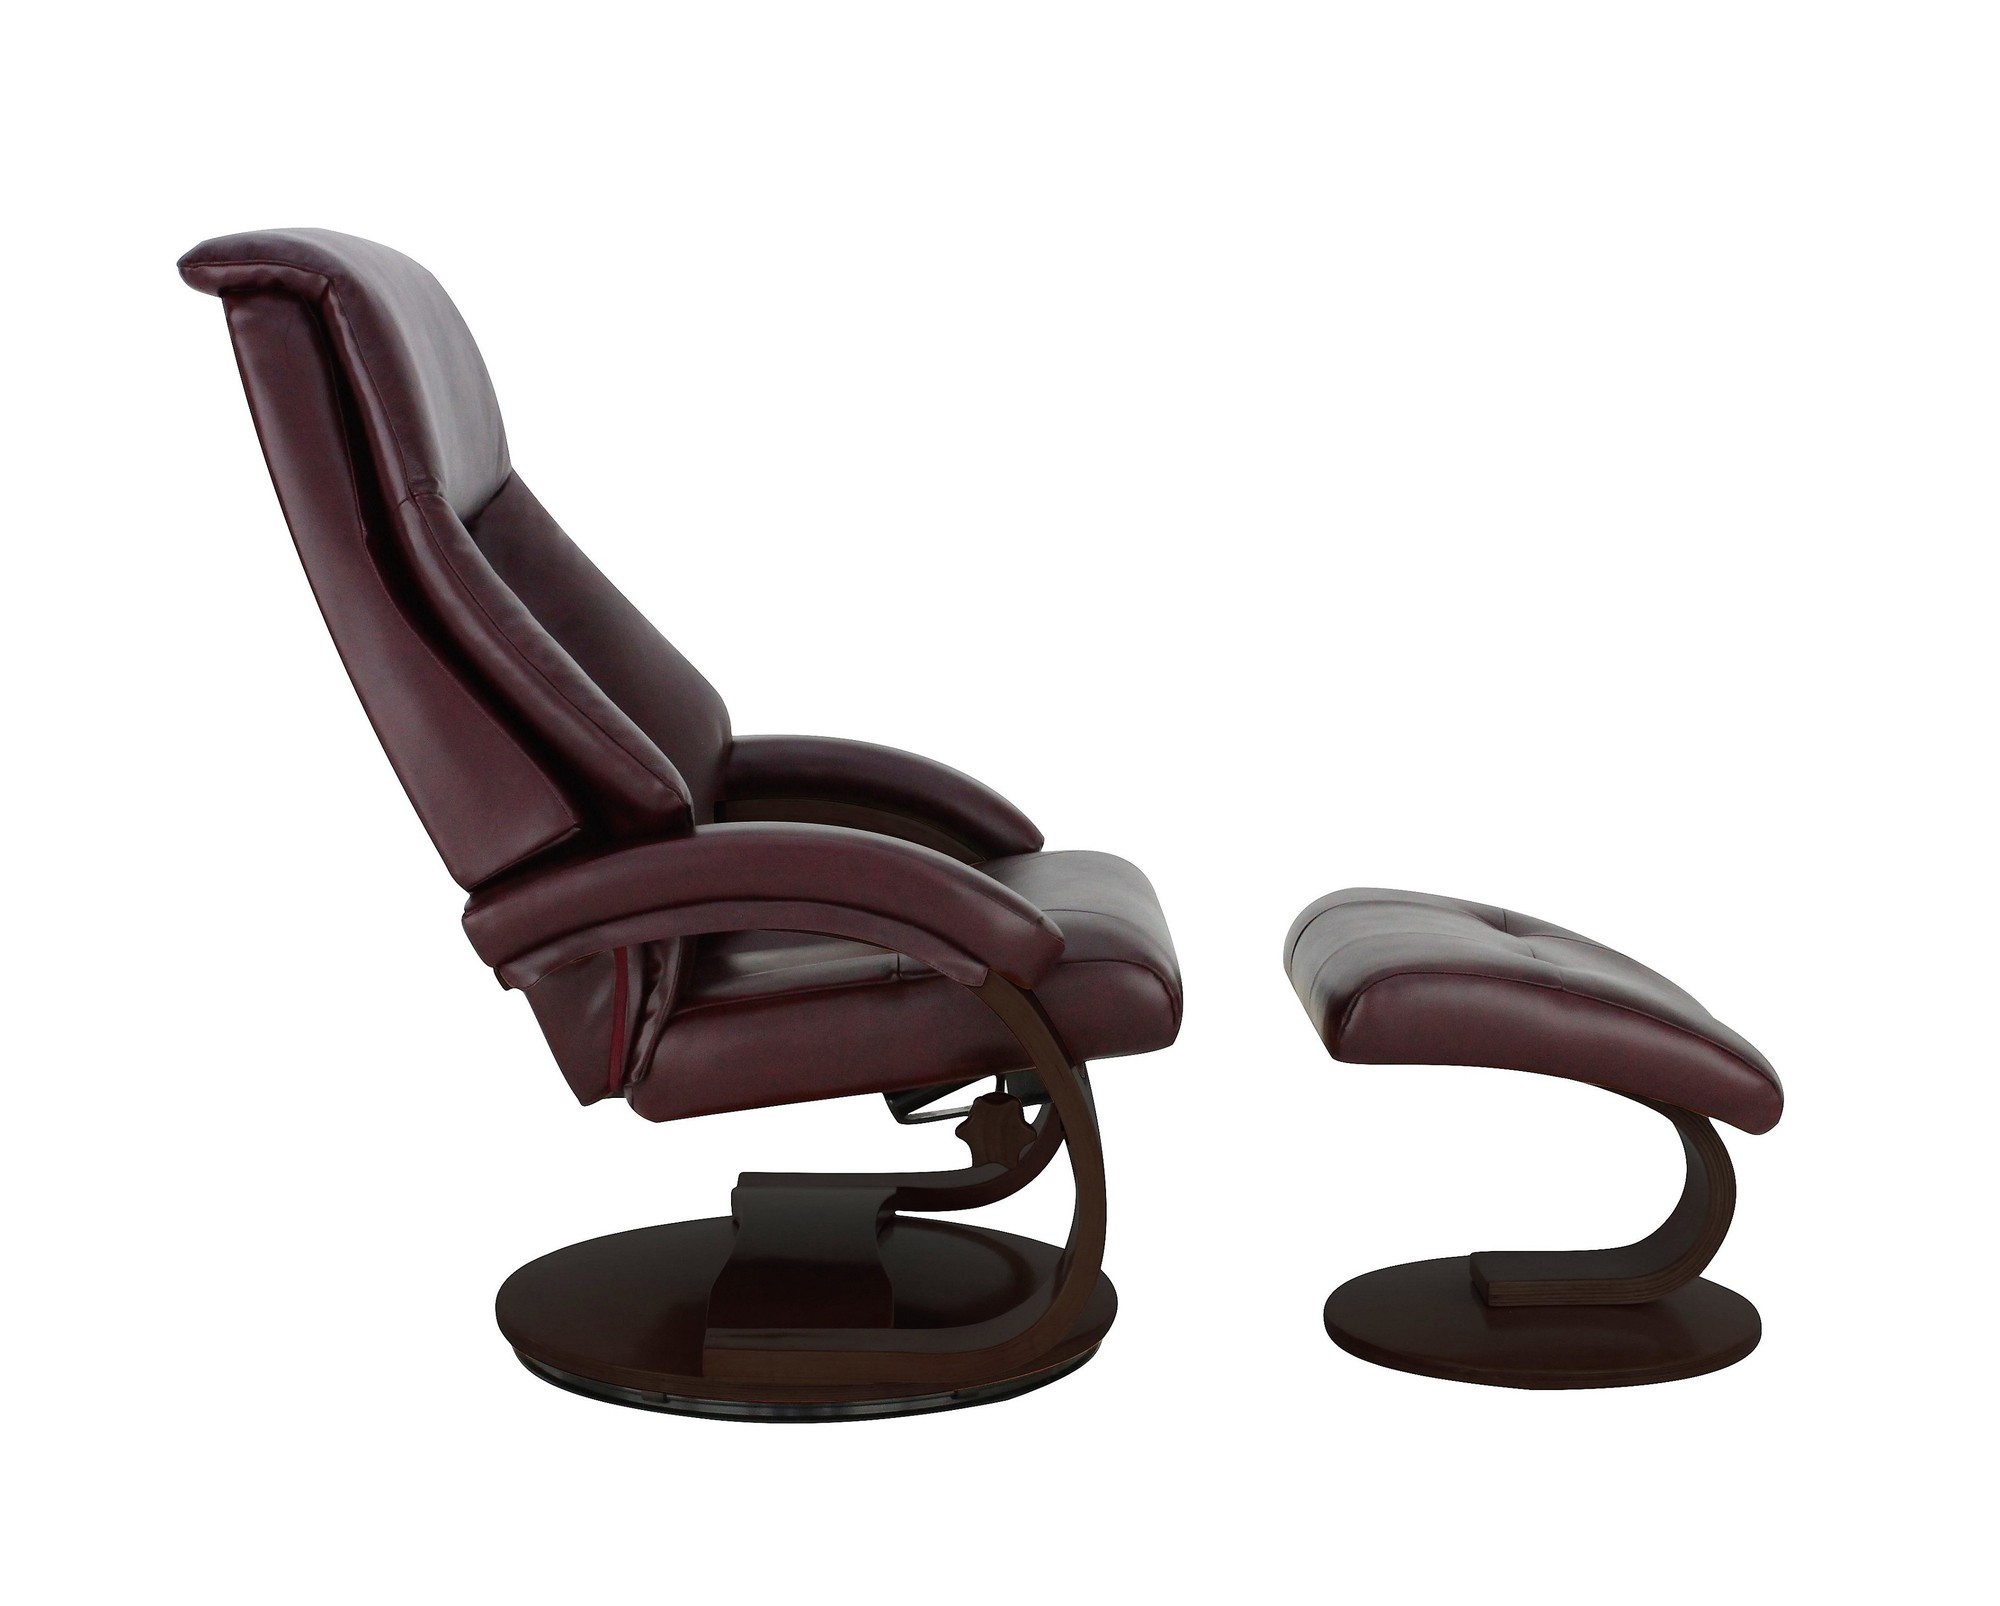 Merlot Faux Leather Swivel Adjustable Recliner and Ottoman Set